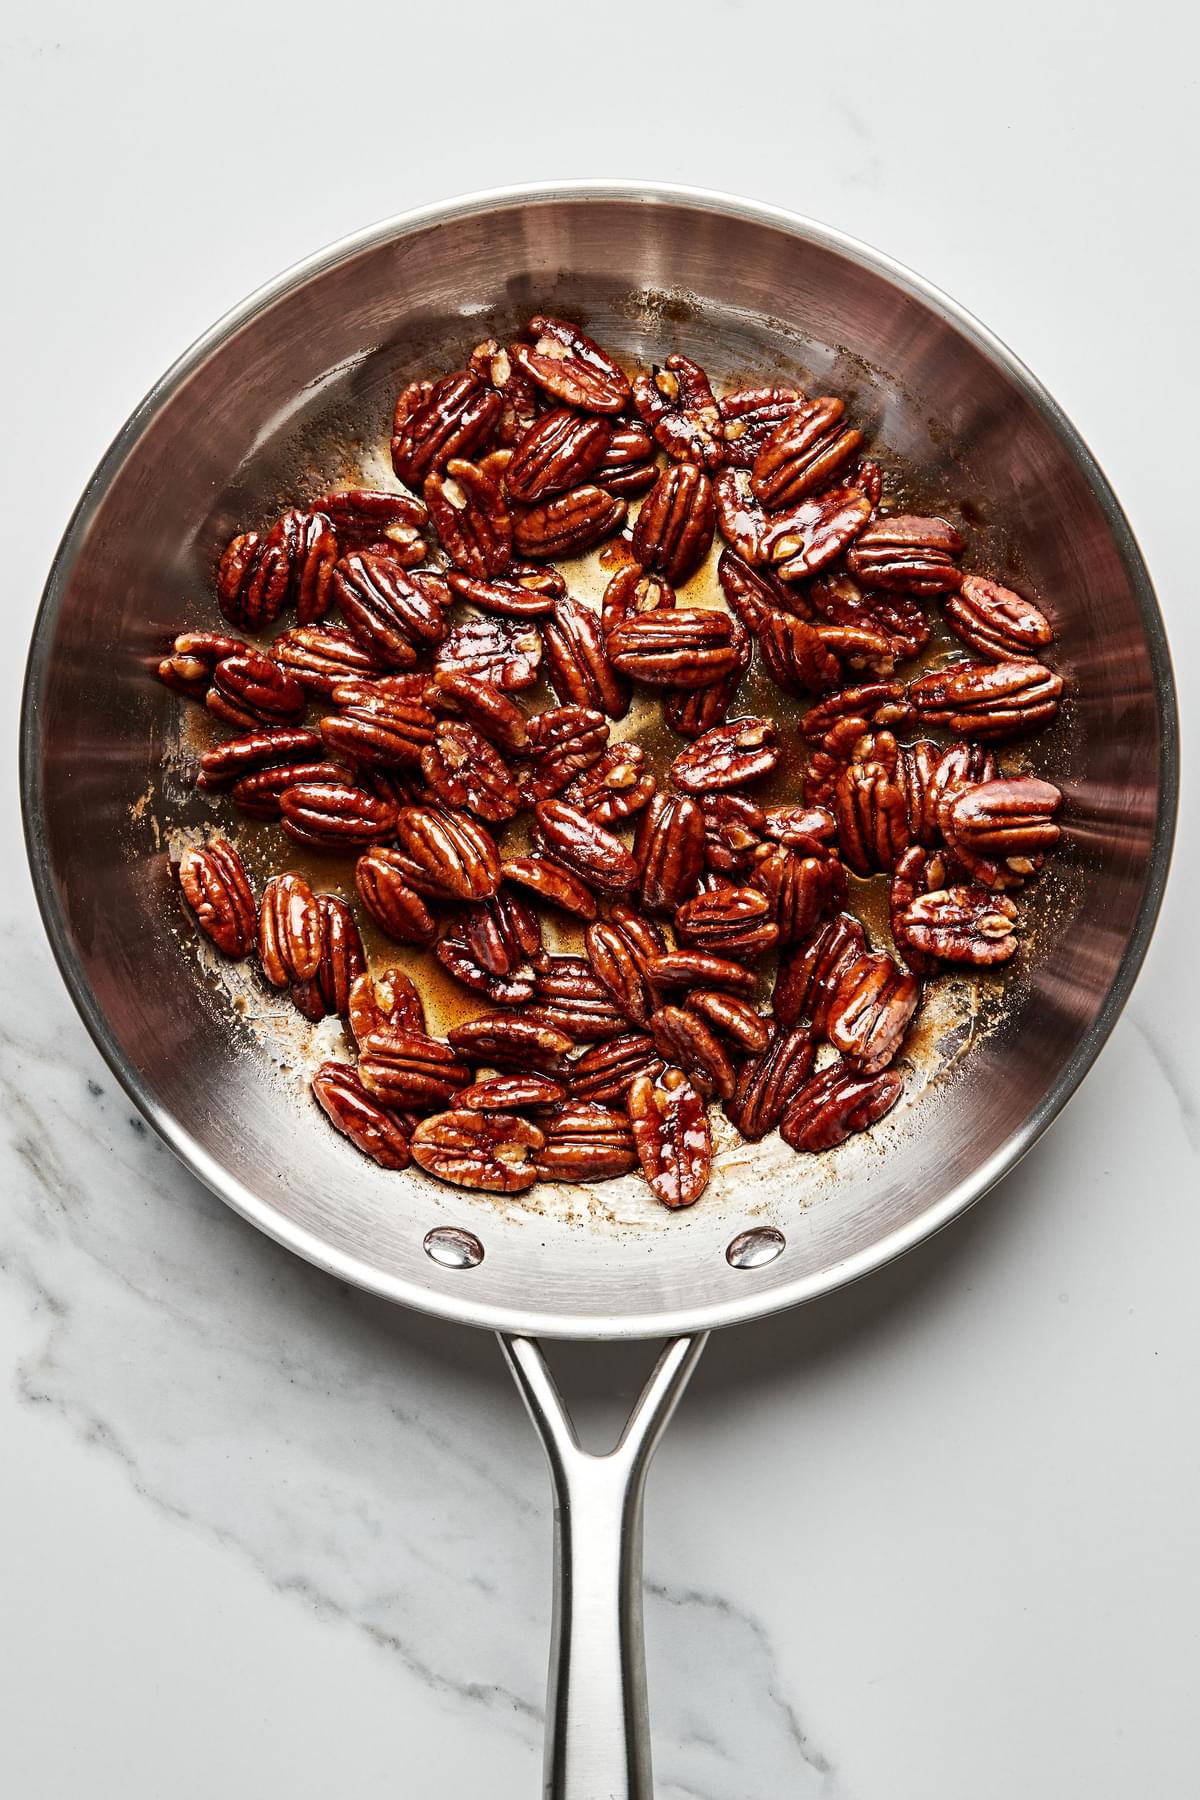 pecans being candied in a skillet with brown sugar, cinnamon, salt, and cayenne